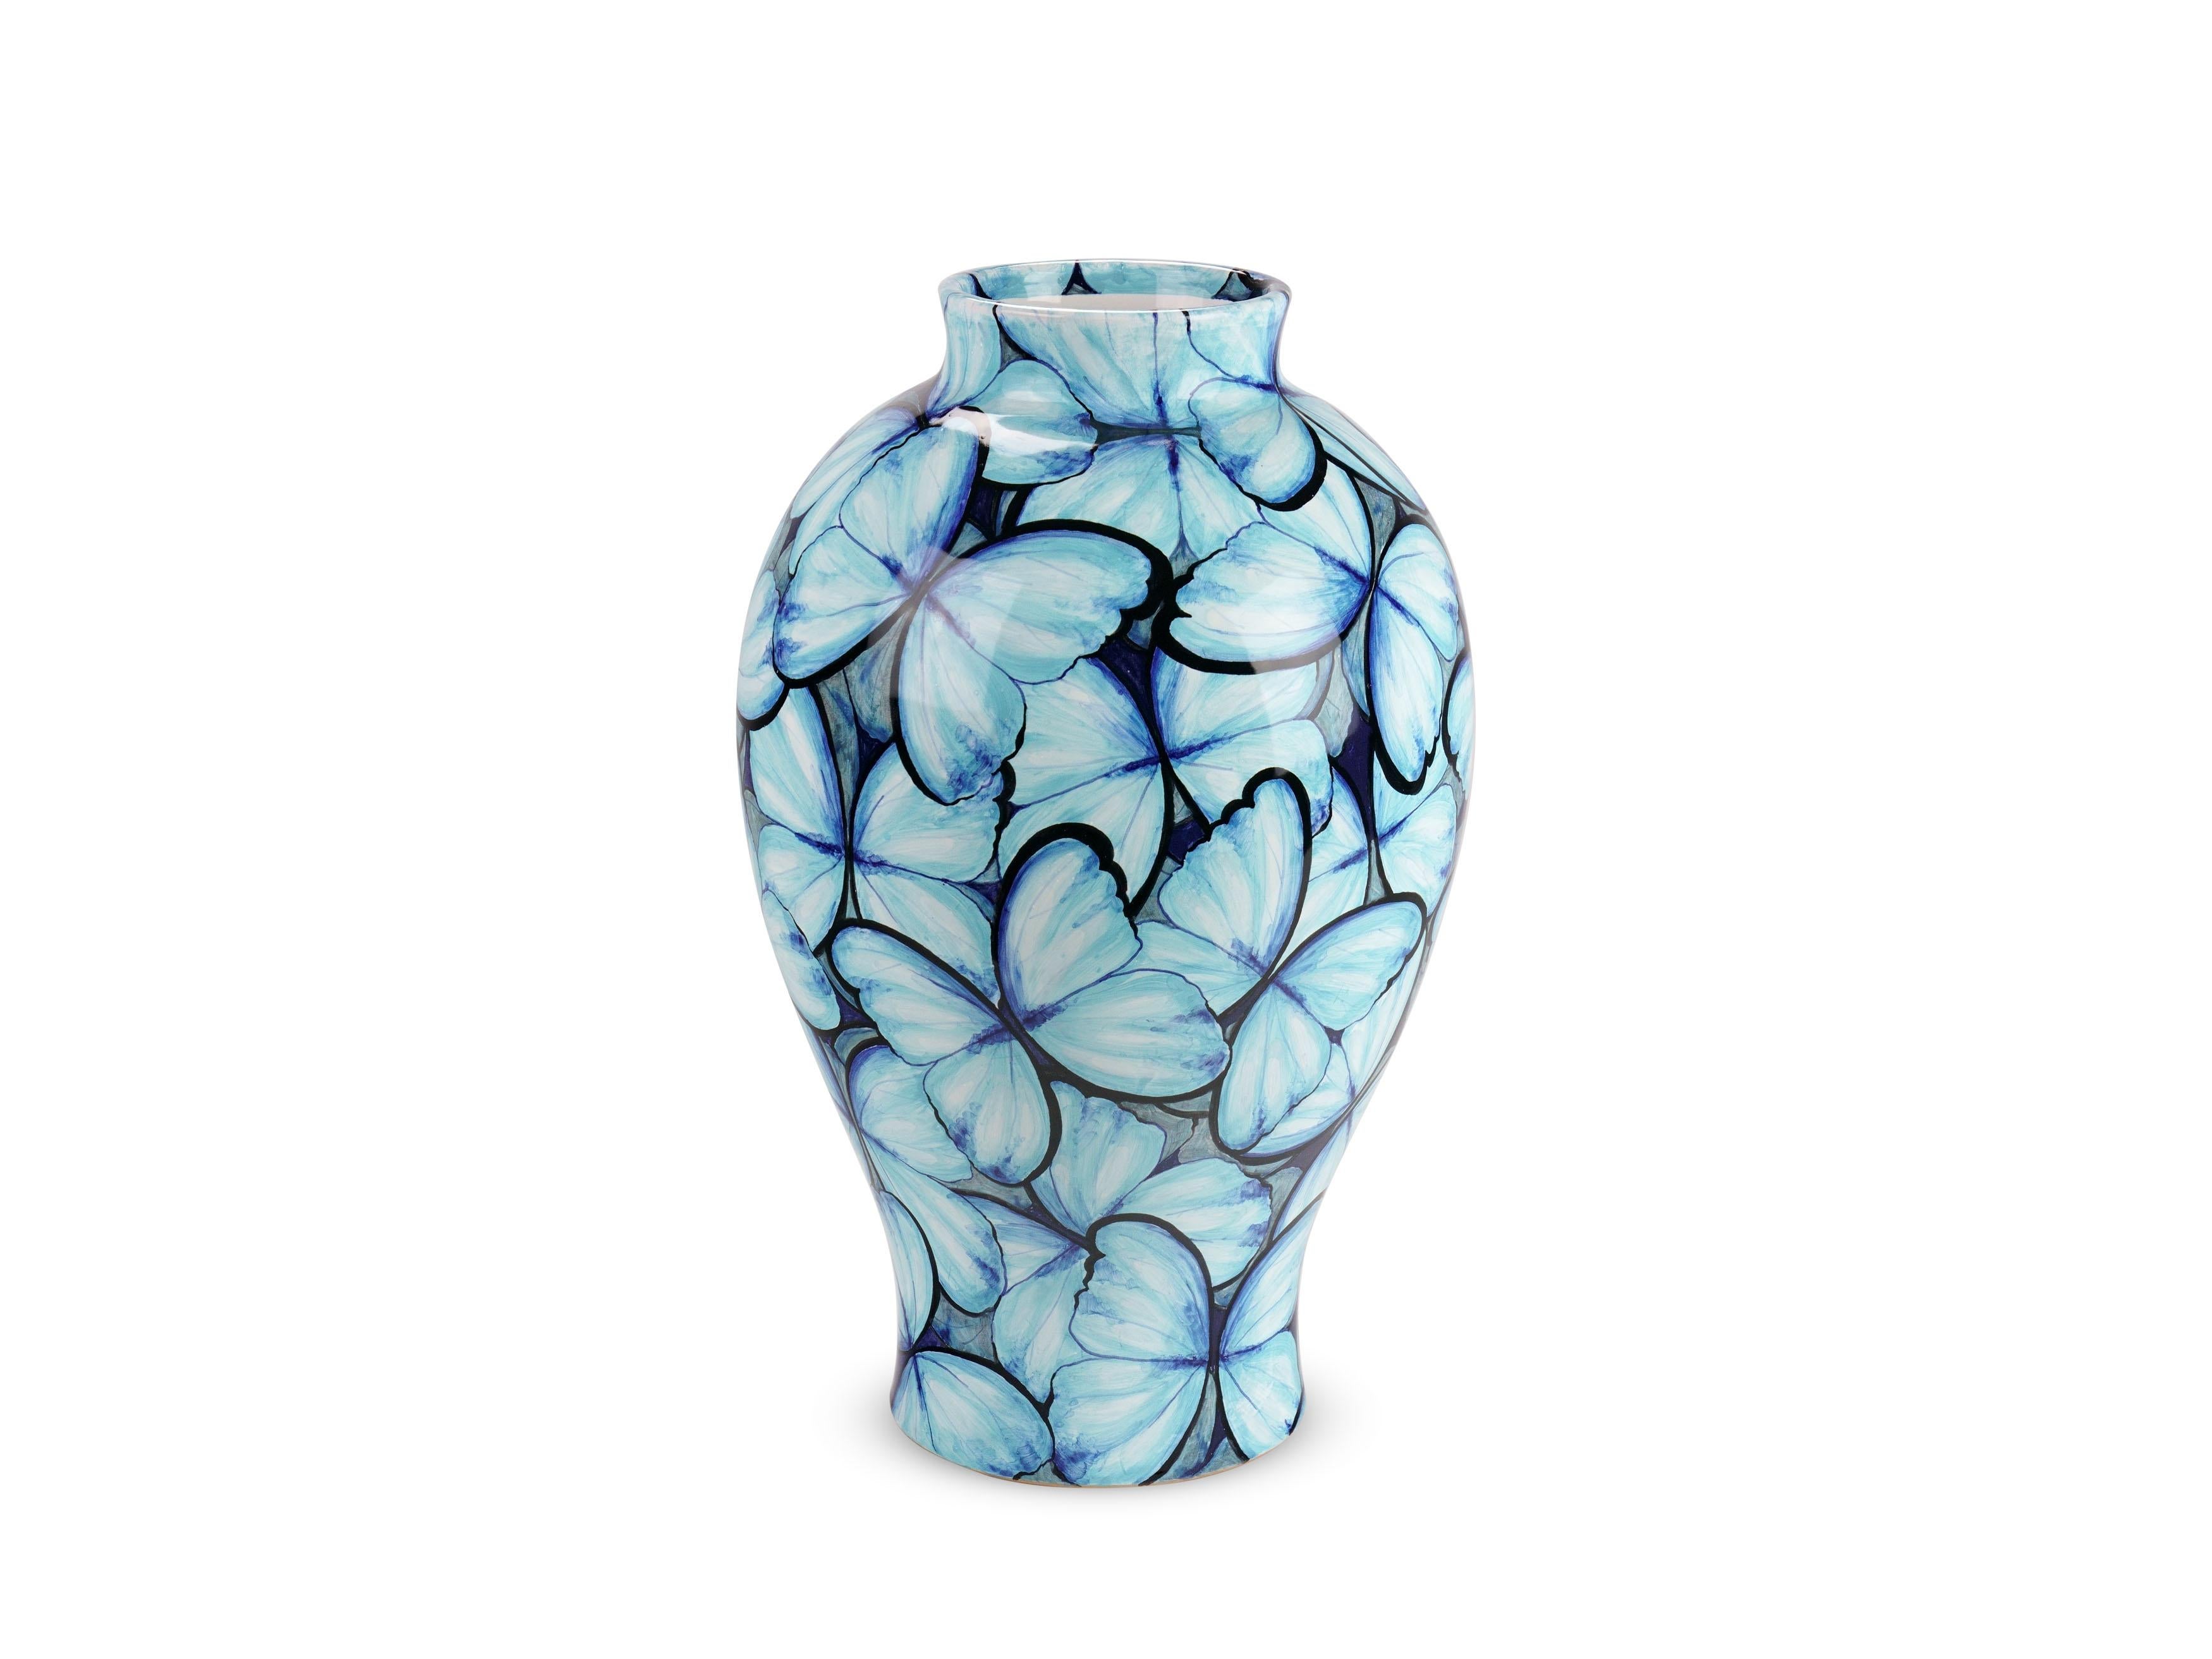 Blue Ceramic Majolica Vase Vessel Decorative Butterflies Hand Painted Italy In New Condition For Sale In Recanati, IT